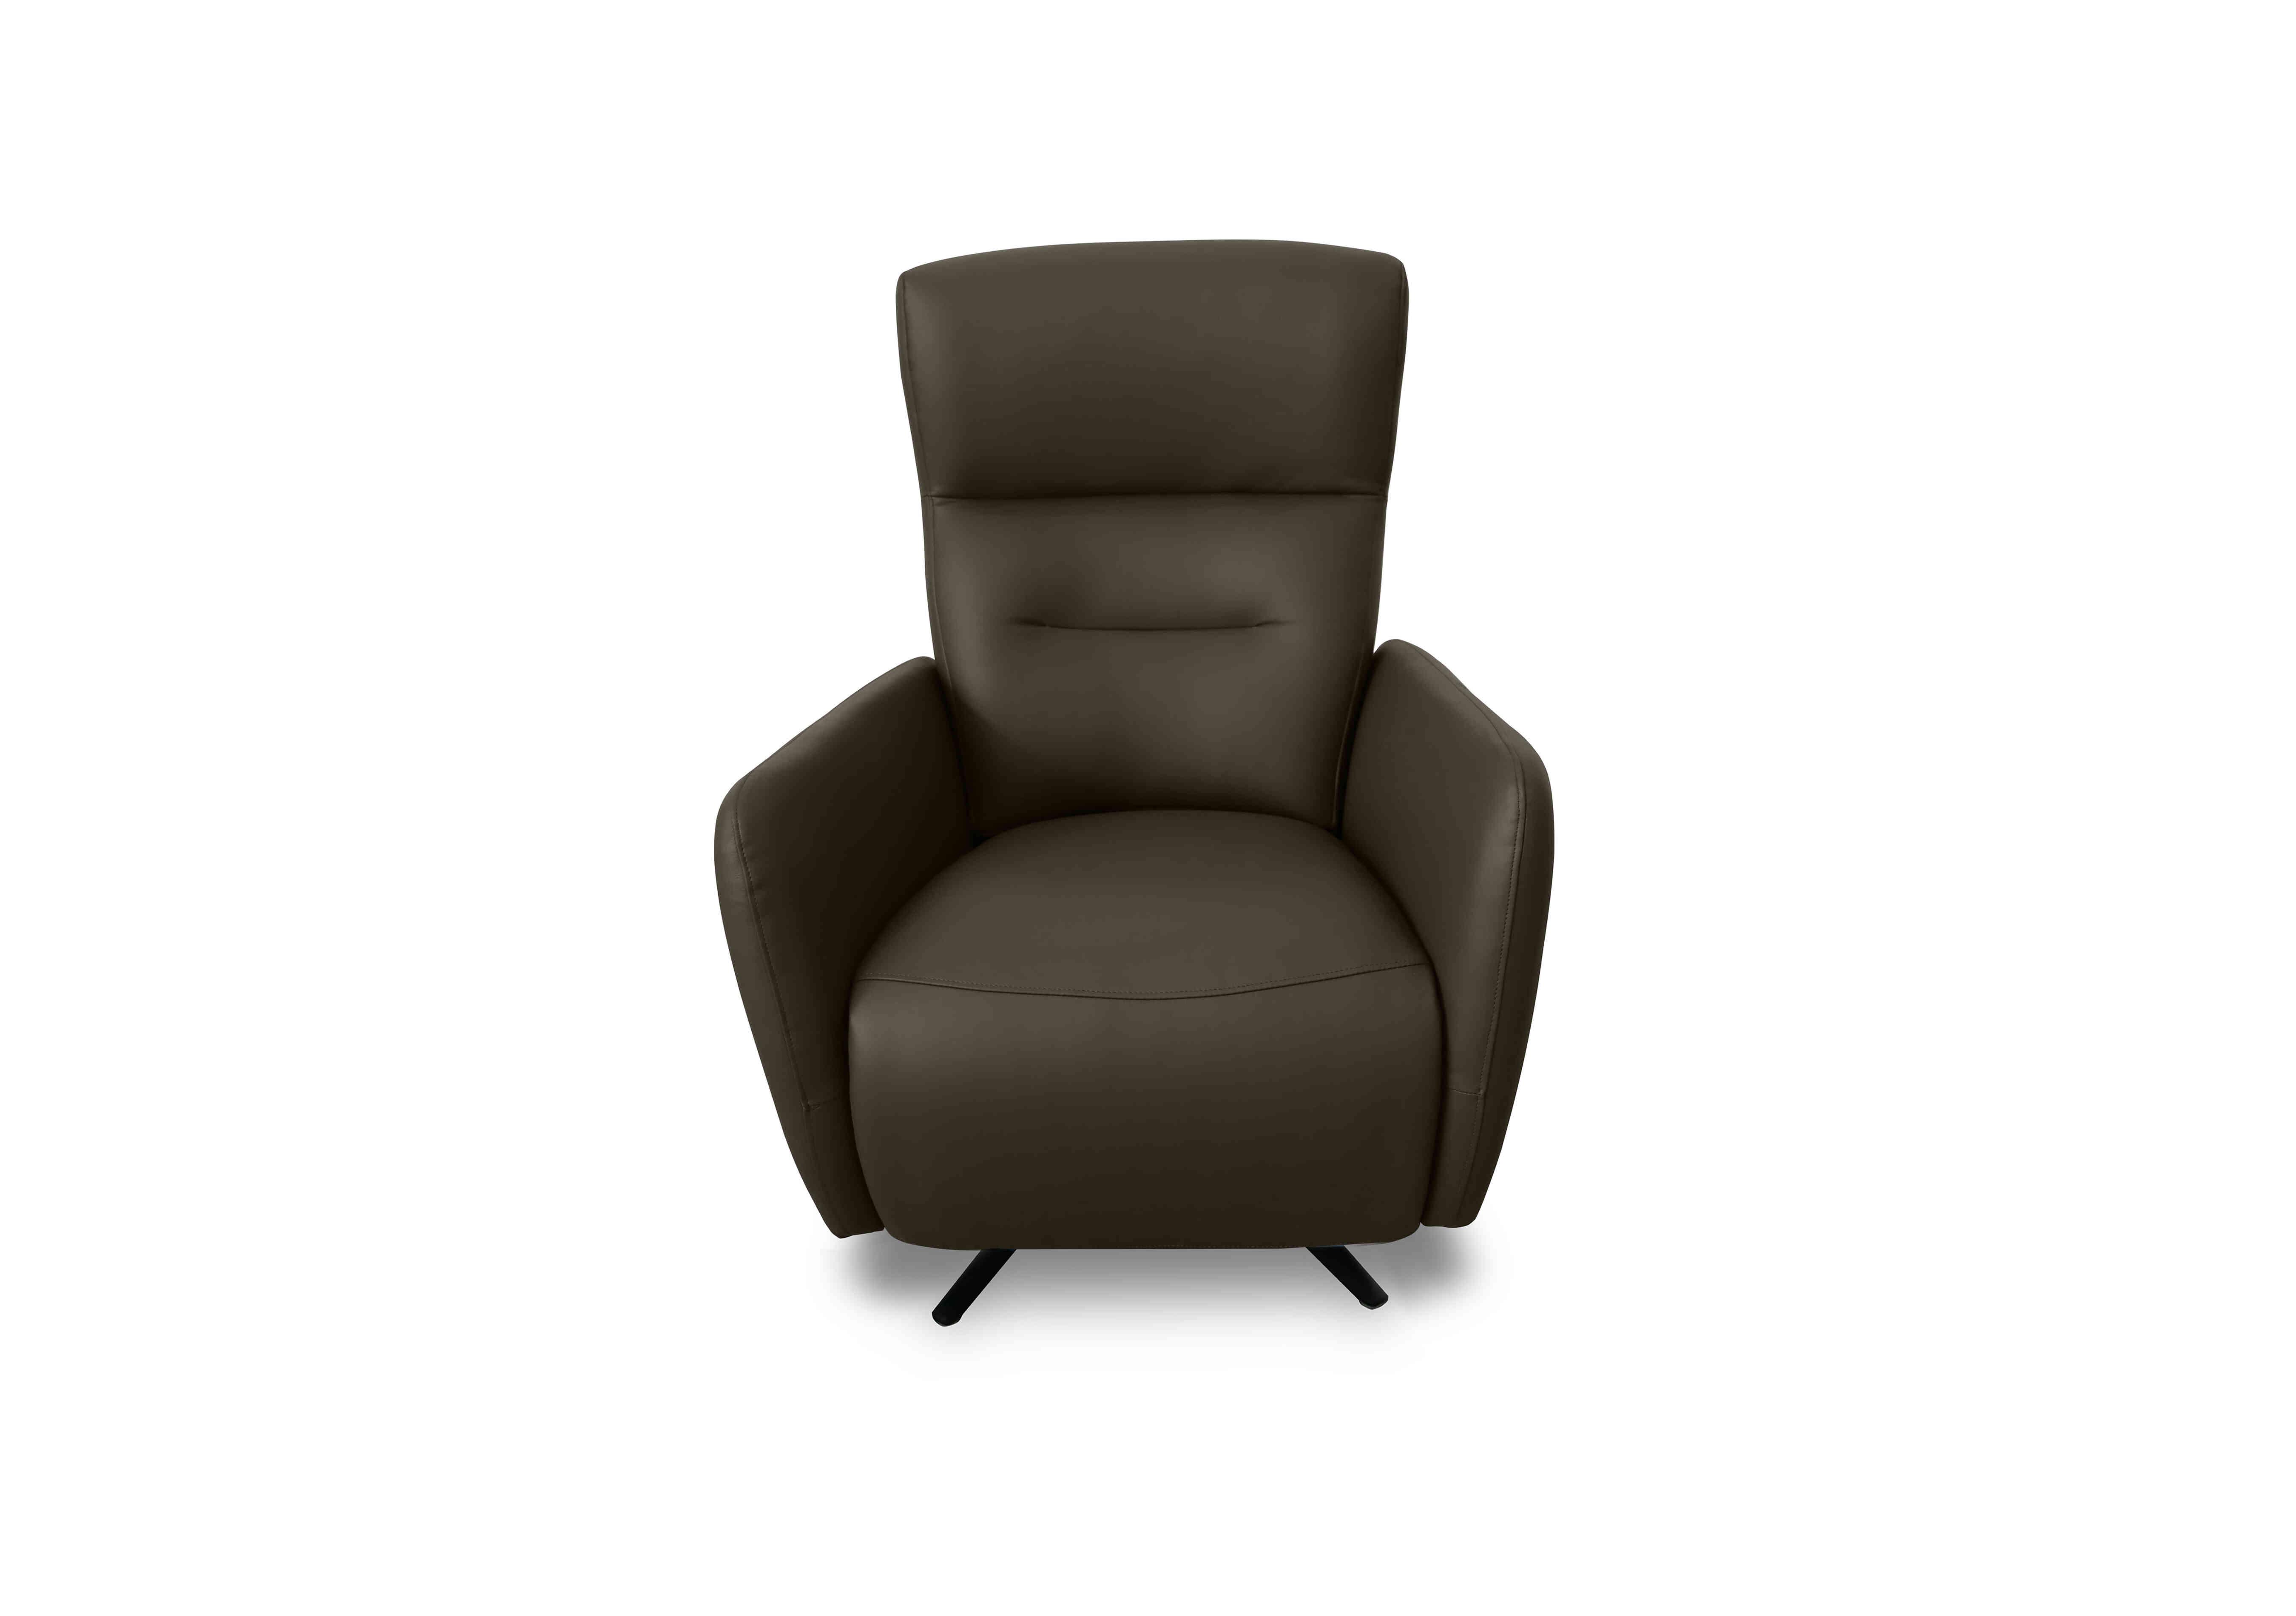 Designer Chair Collection Le Mans Leather Dual Power Recliner Swivel Chair in Nw-548e Olive on Furniture Village